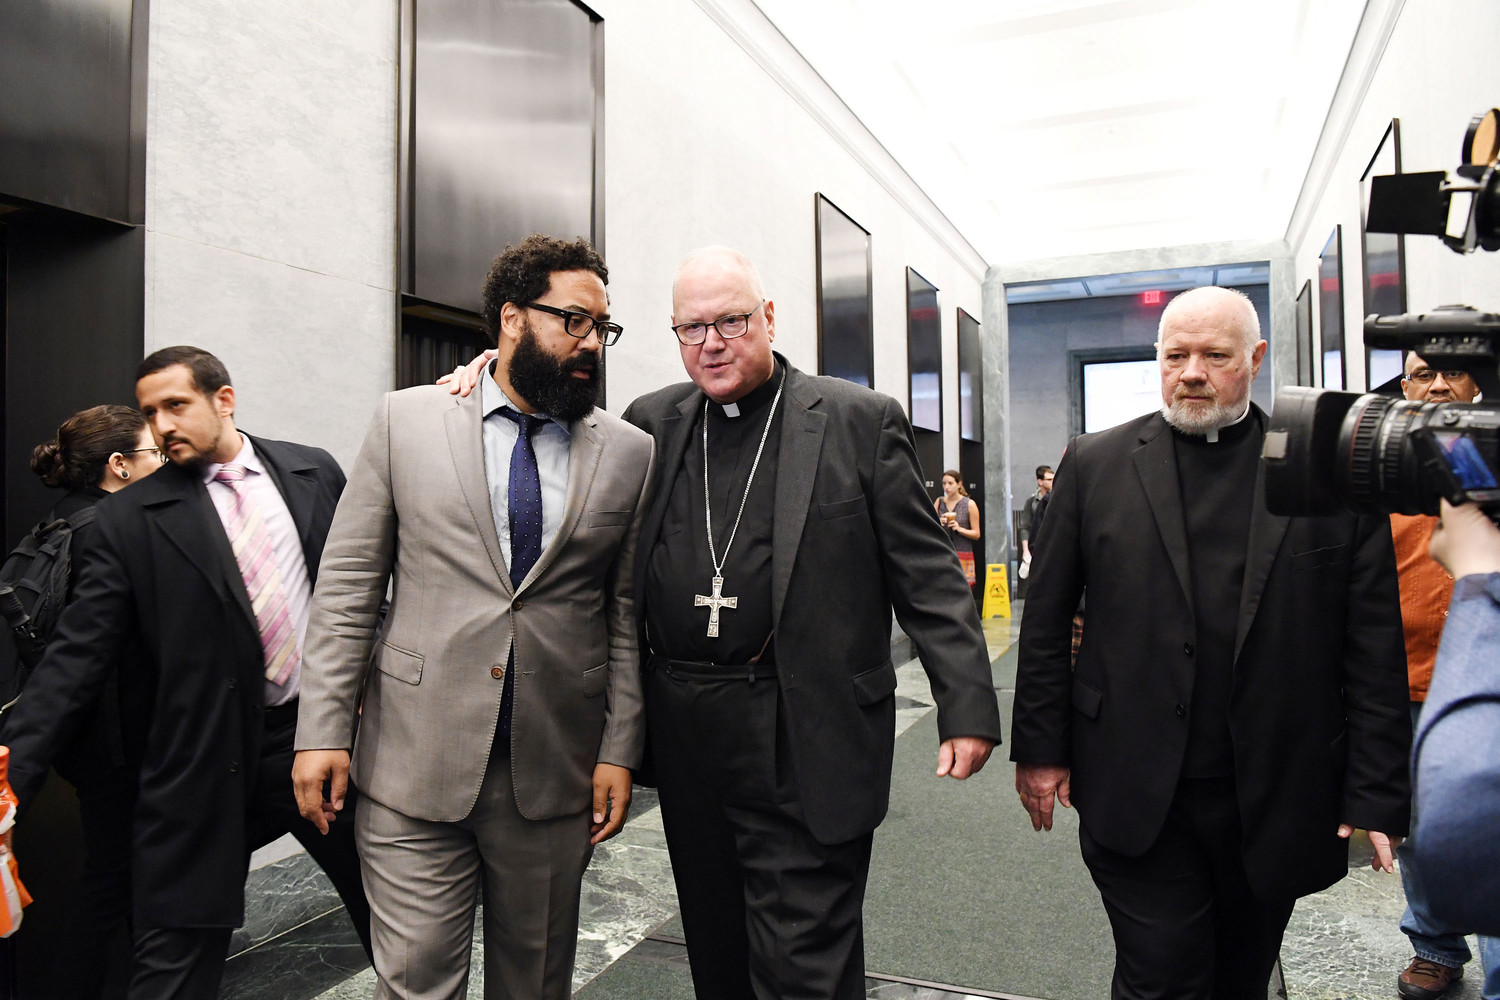 Walking to the elevators at archdiocesan Catholic Charities Immigration Services in lower Manhattan June 28, Cardinal Dolan speaks with Marco Carrion of the Mayor’s staff. Msgr. Kevin Sullivan, executive director of Catholic Charities, is at right.